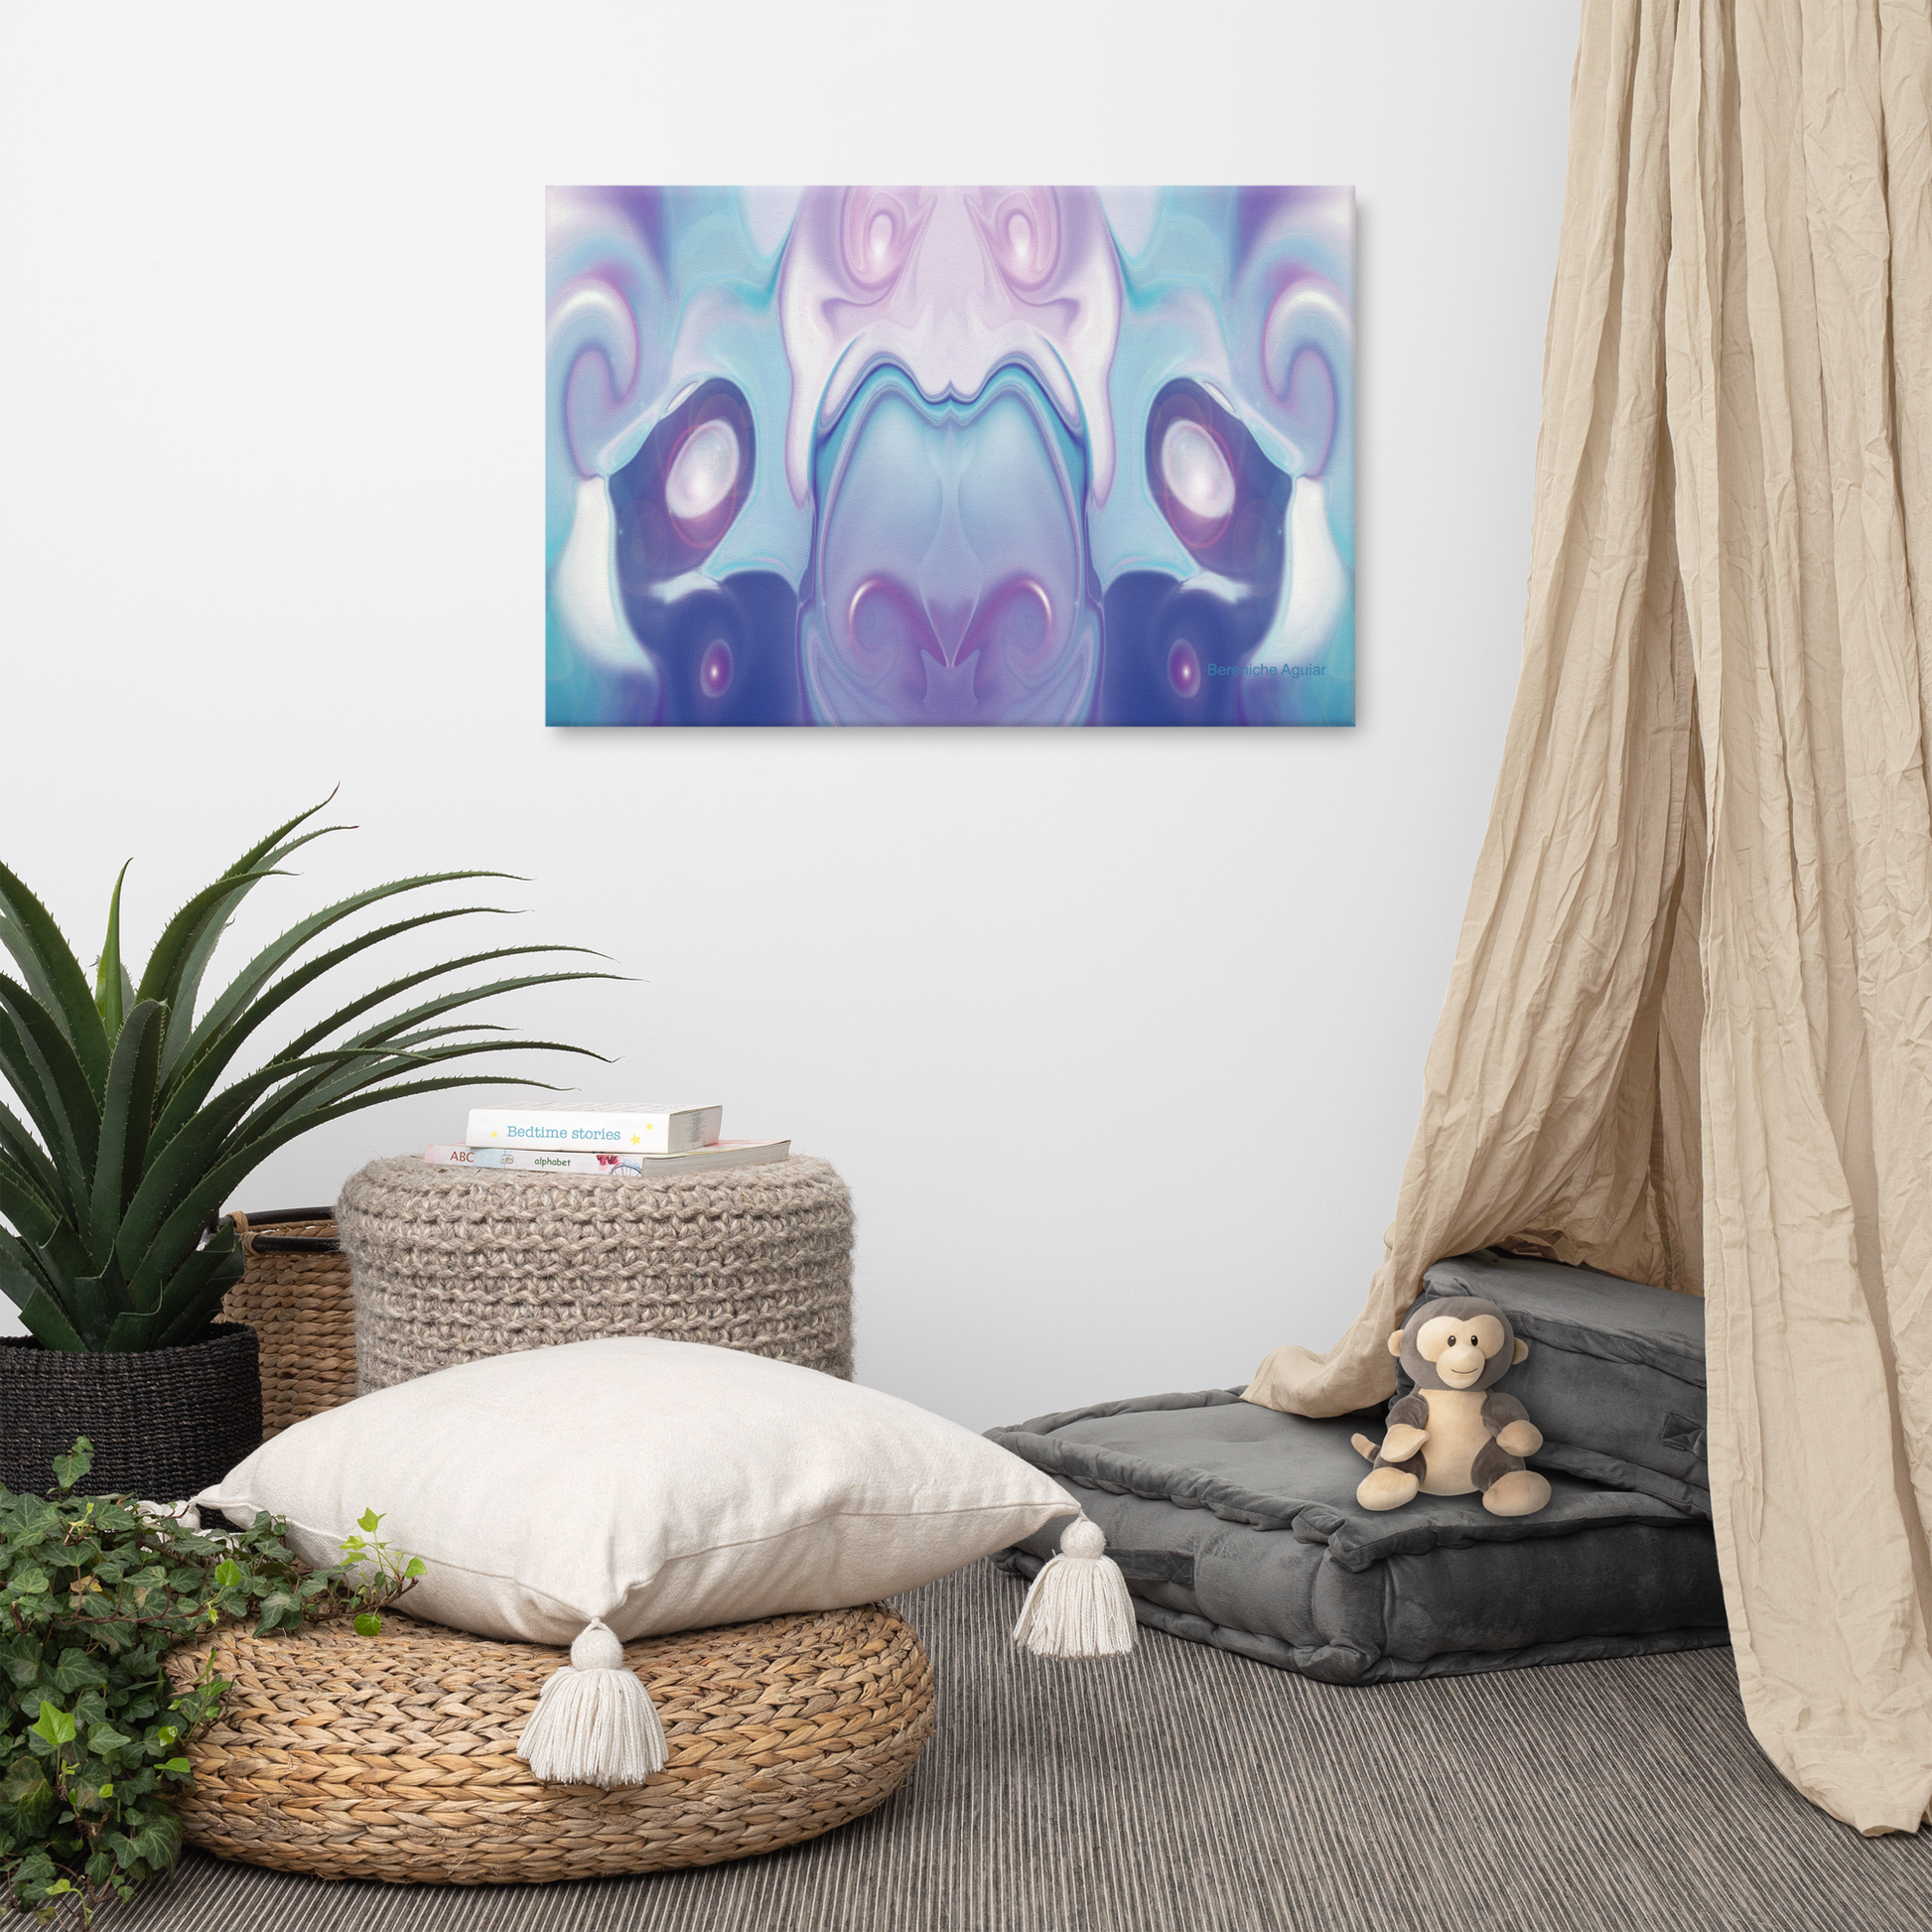 Space Elephant BeSculpt Abstract Wall Art on Canvas No. 2 